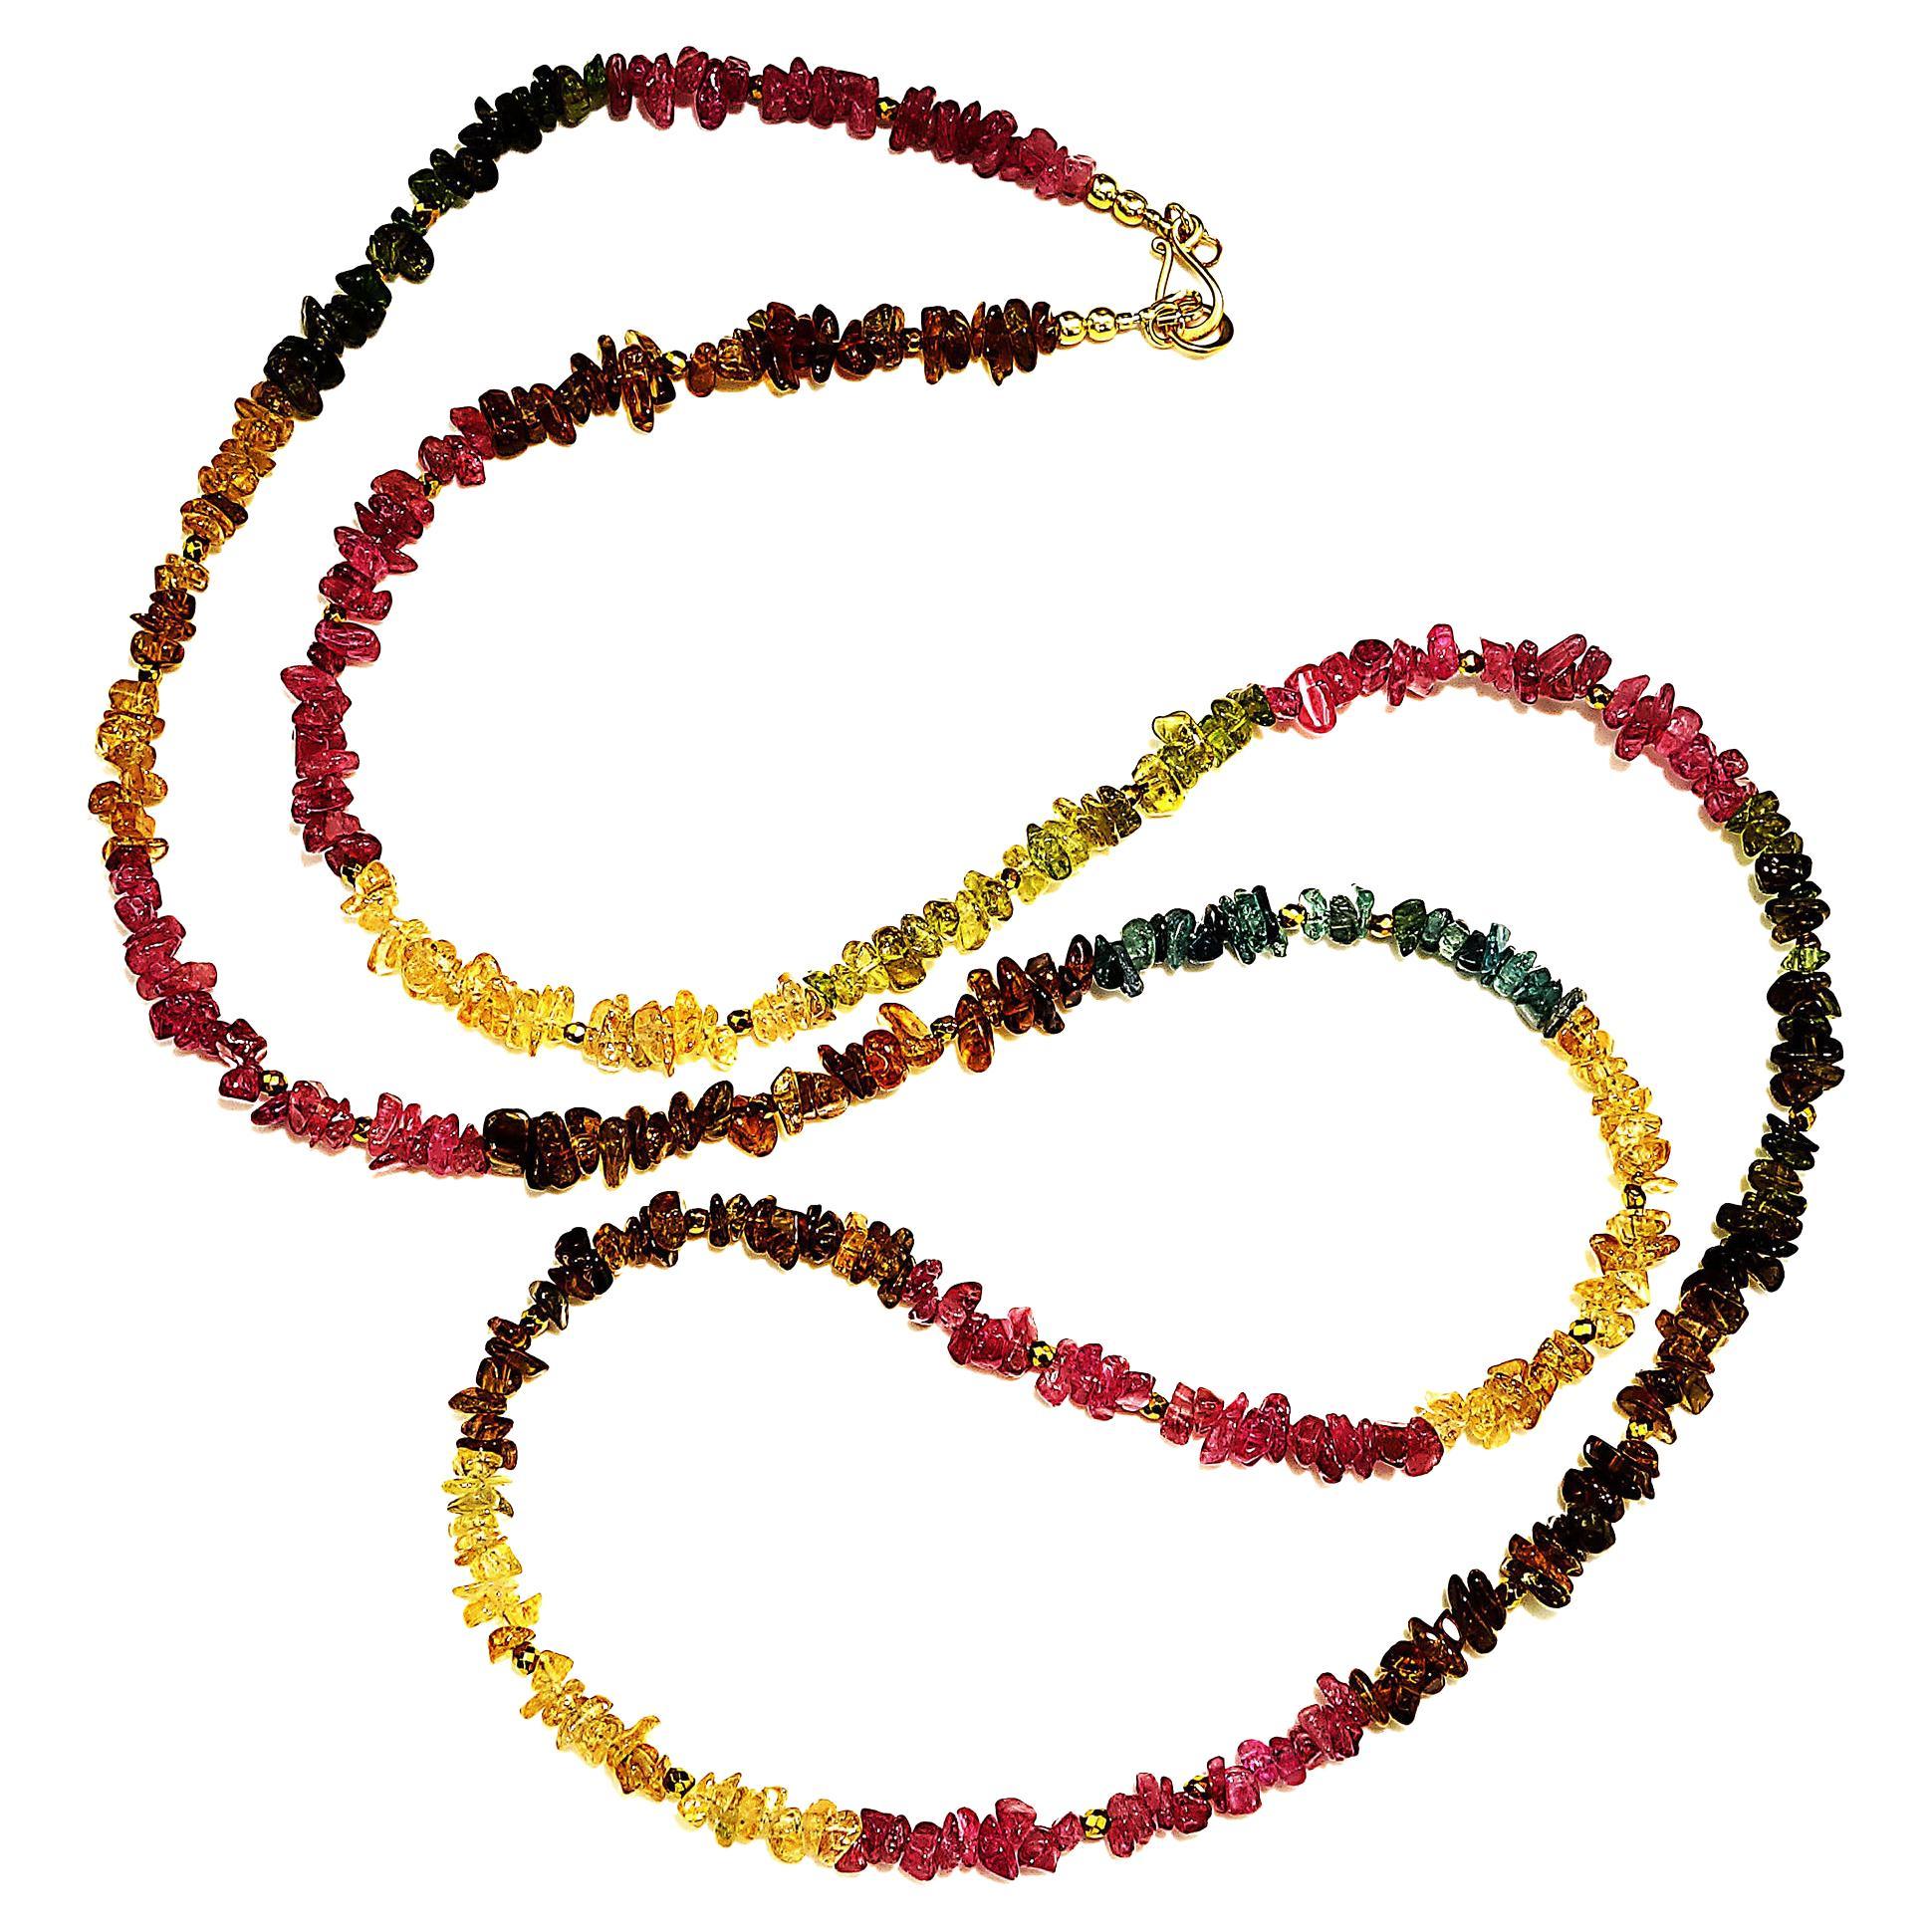 34 Inches of Brazilian Gemstone Polished Chips accented with faceted Pyrite necklace.  This gorgeous long drapey  necklace is an awesome display of color:  Pink, blue, brown, green, and gold.  It can be worn long, tied, looped around your neck